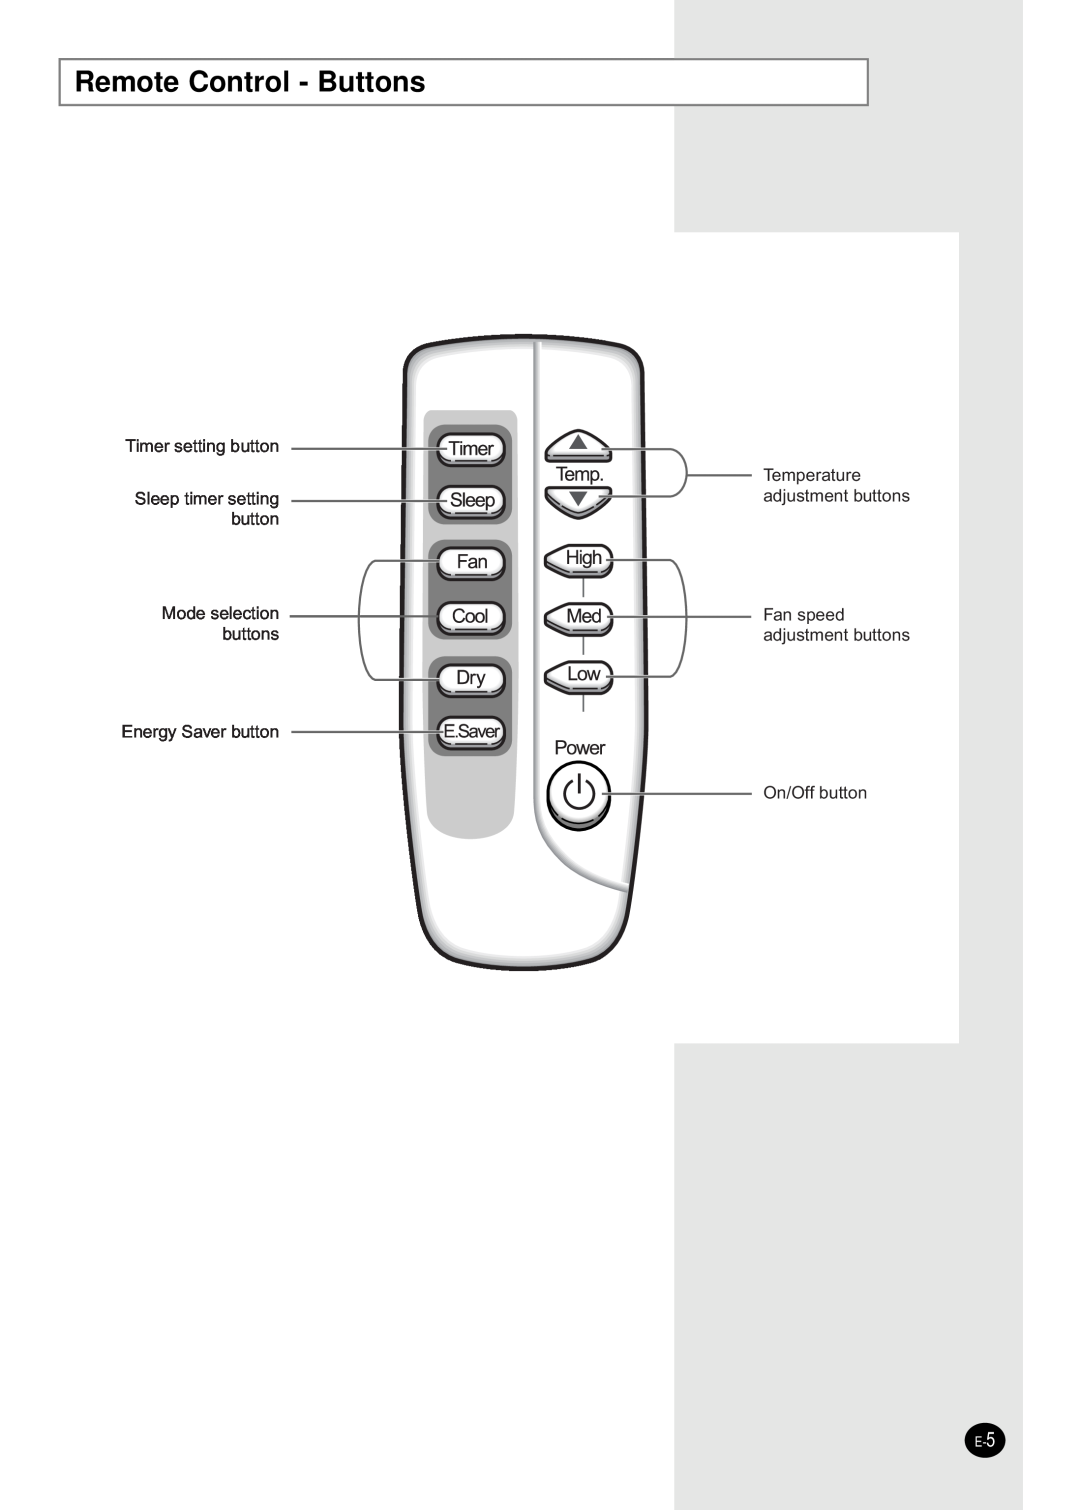 Samsung AW089CB Remote Control - Buttons, Timer setting button Sleep timer setting button, Temperature adjustment buttons 